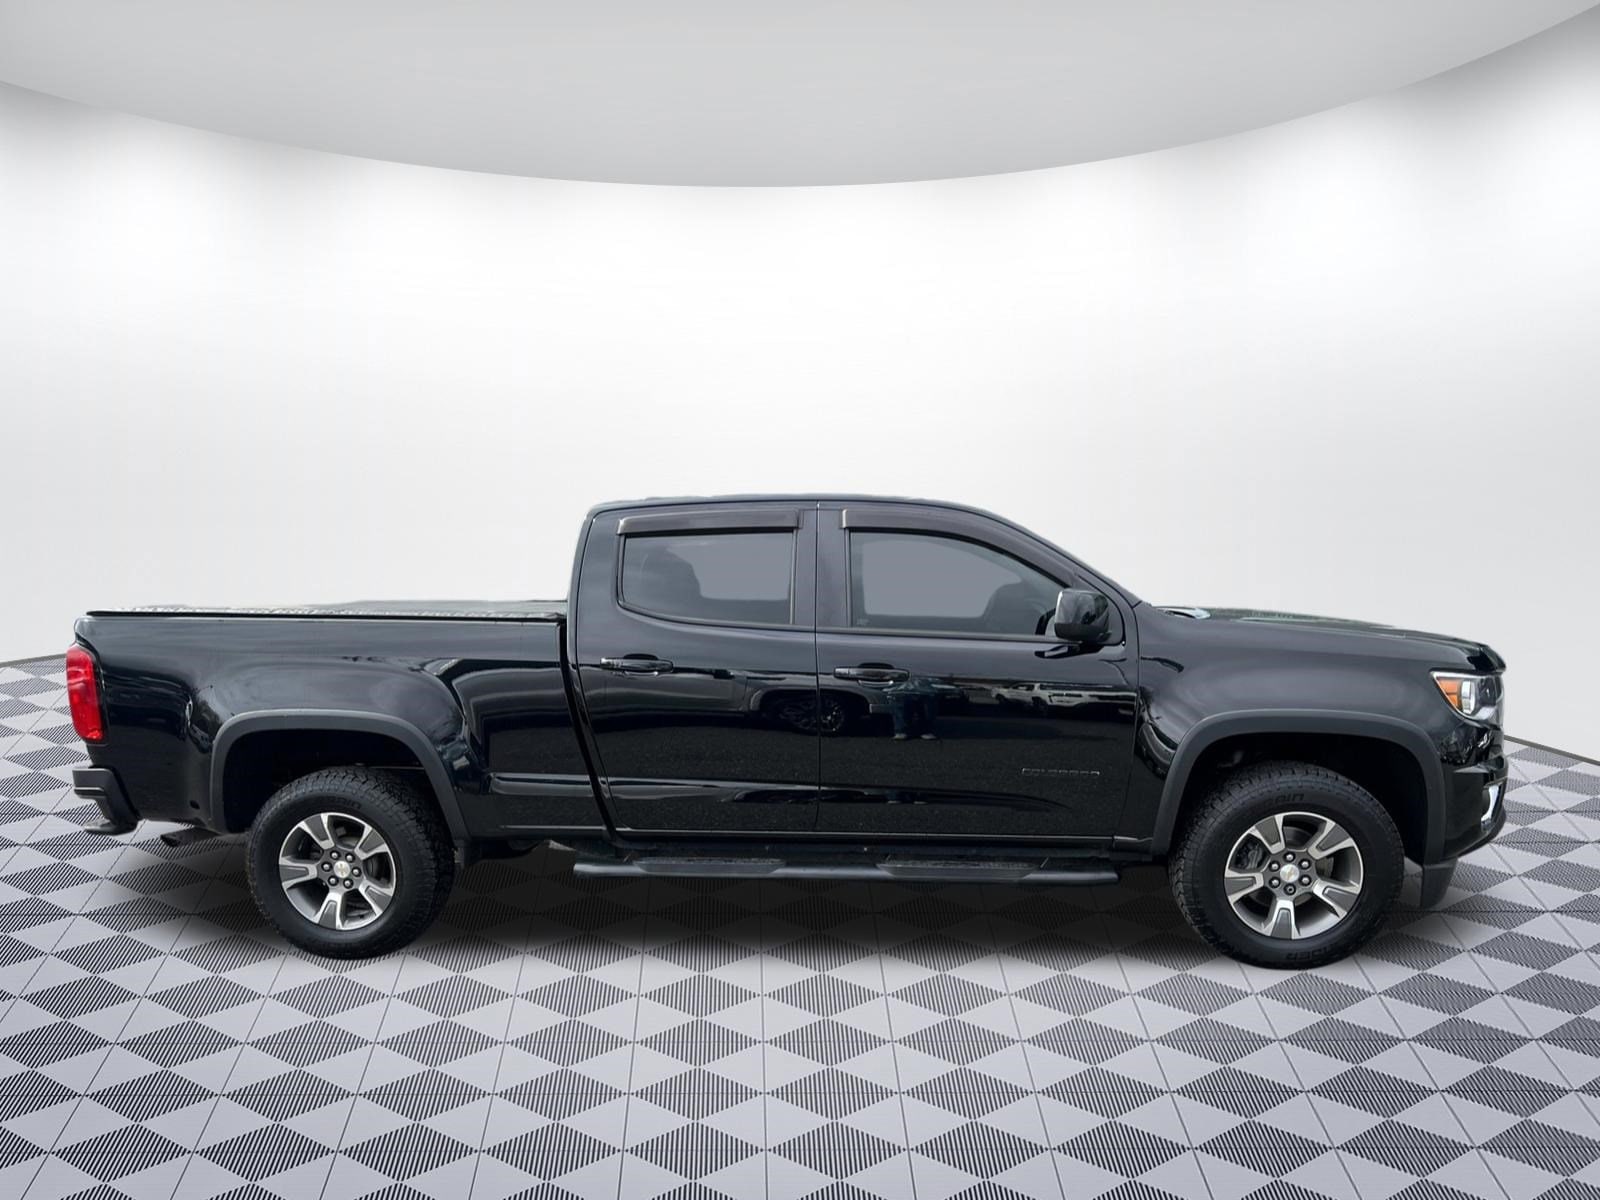 Used 2015 Chevrolet Colorado Z71 with VIN 1GCGTCE31F1163480 for sale in Bellingham, WA